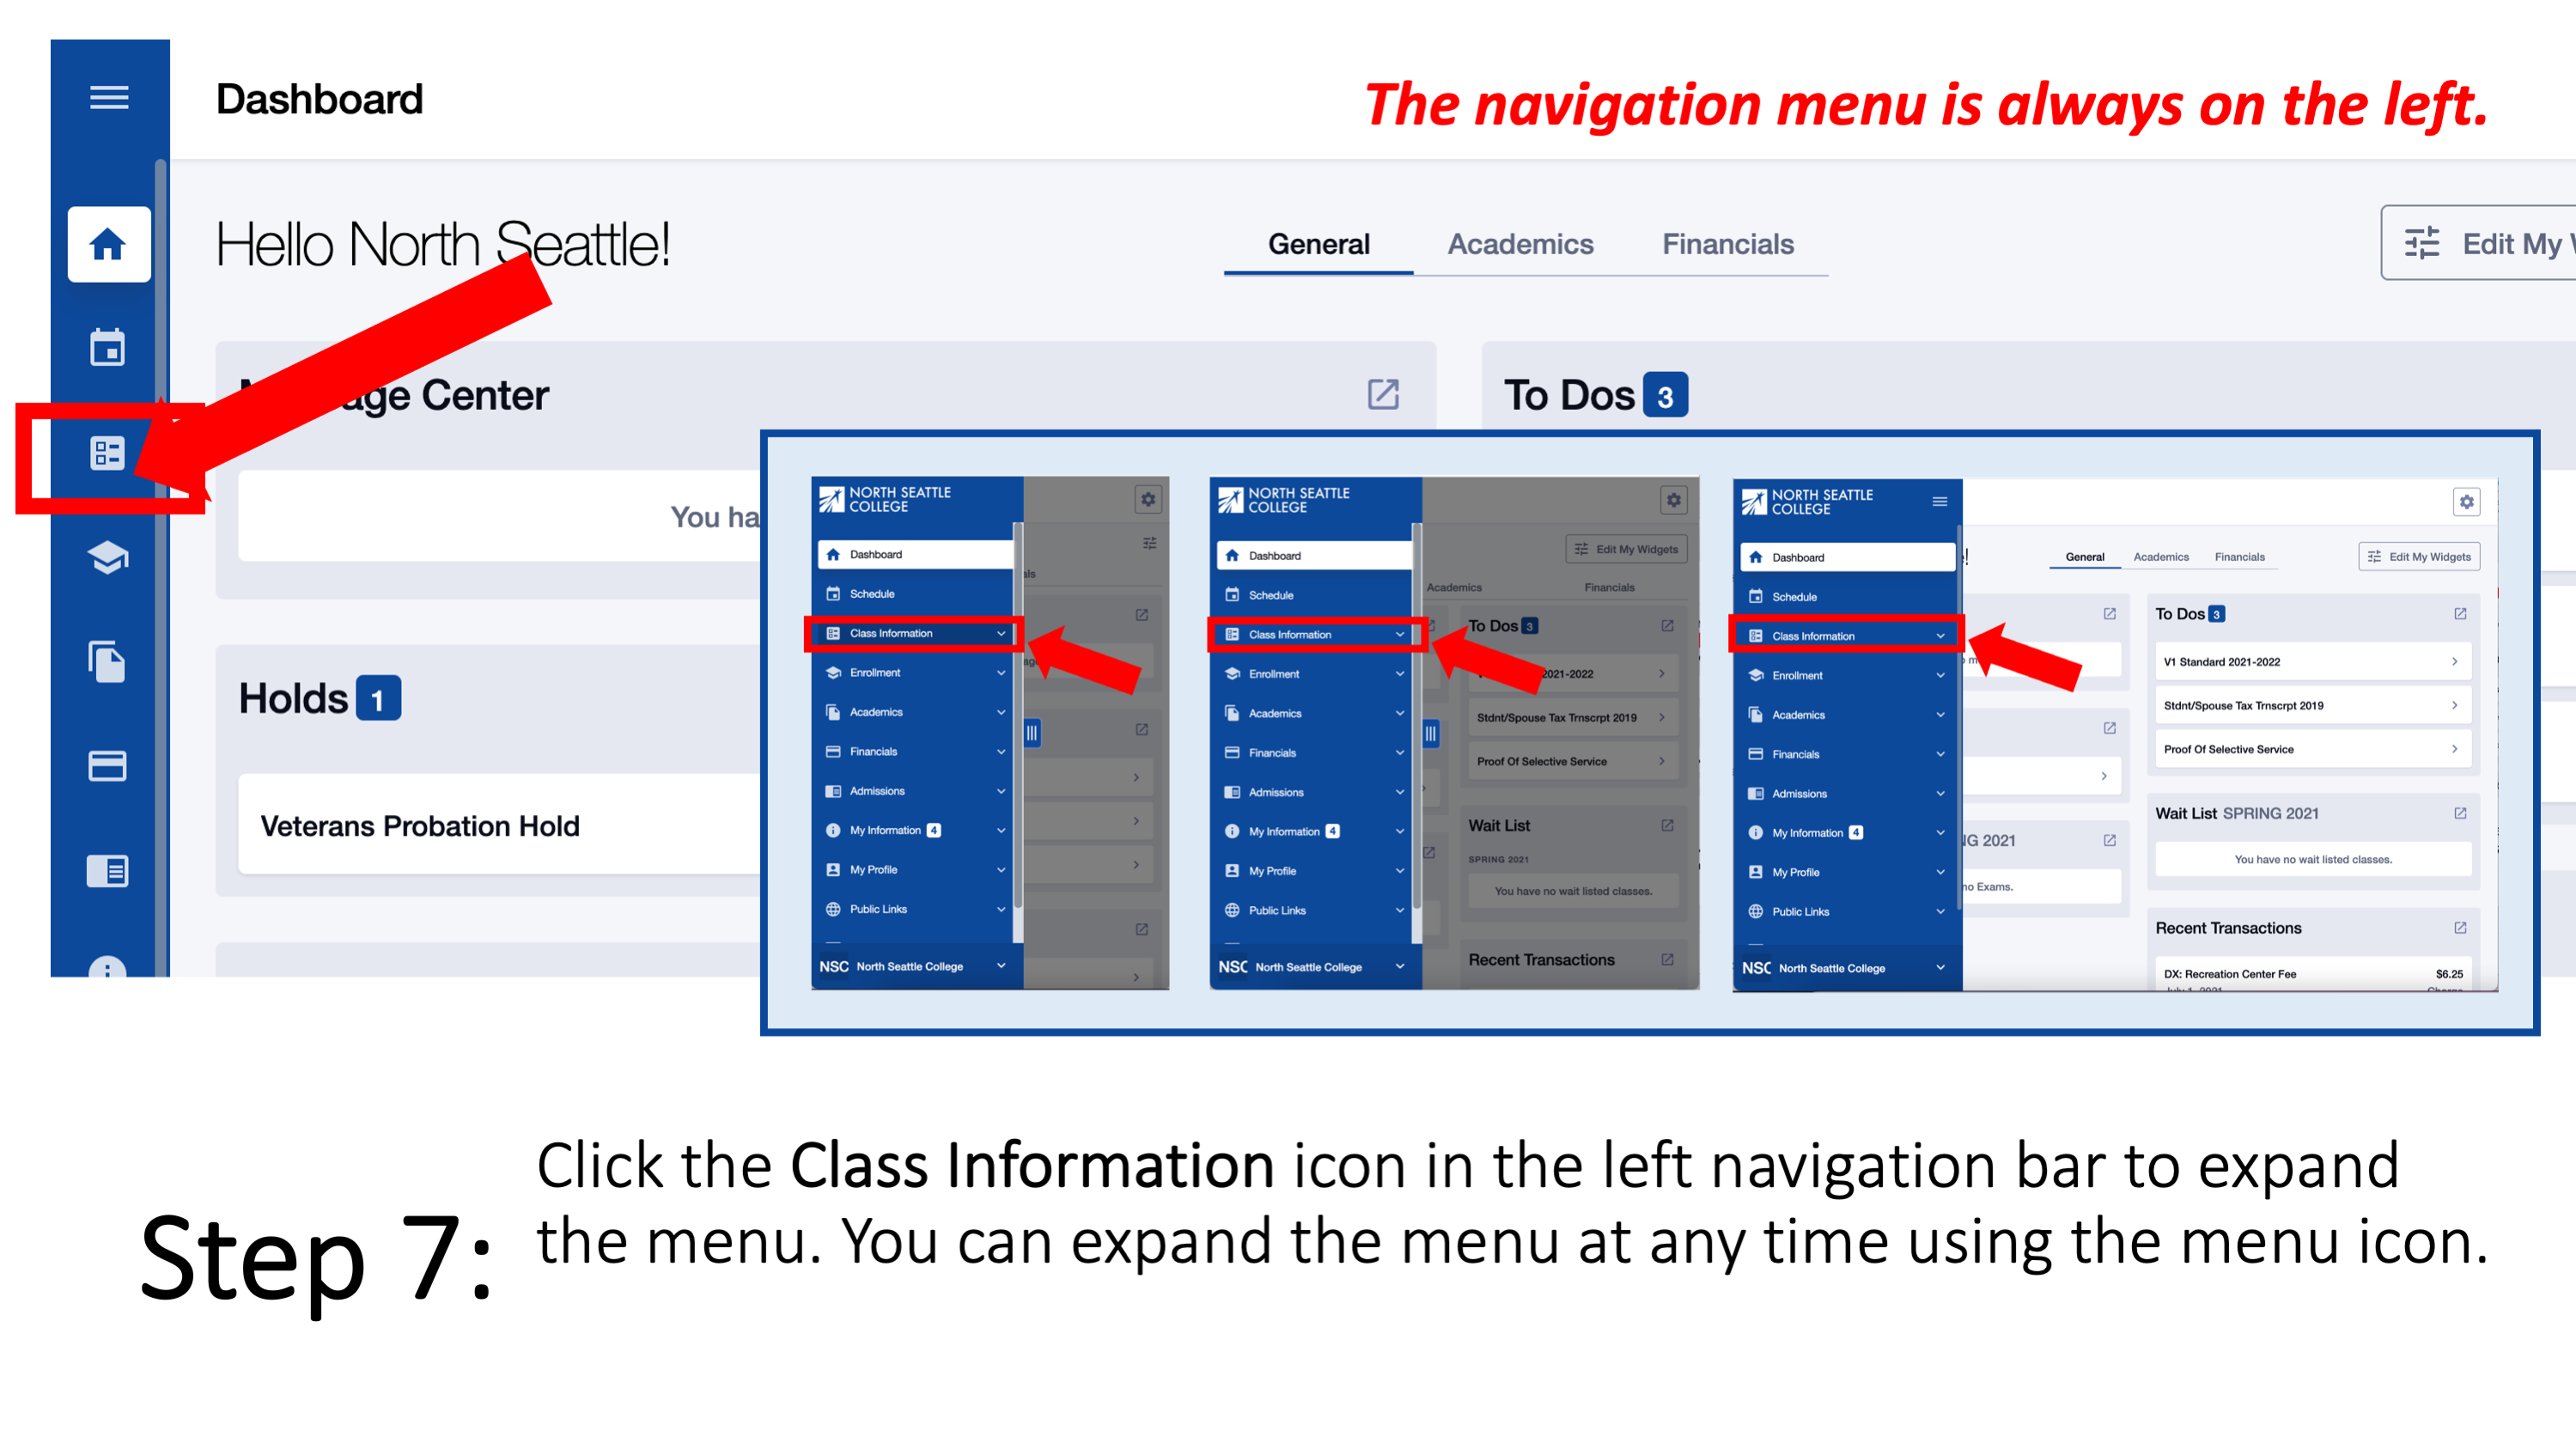 Step 7: Click the Class Information icon in the left navigation bar to expand the menu. You can expand the menu at any time using the menu icon. The navigation menu is always on the left.